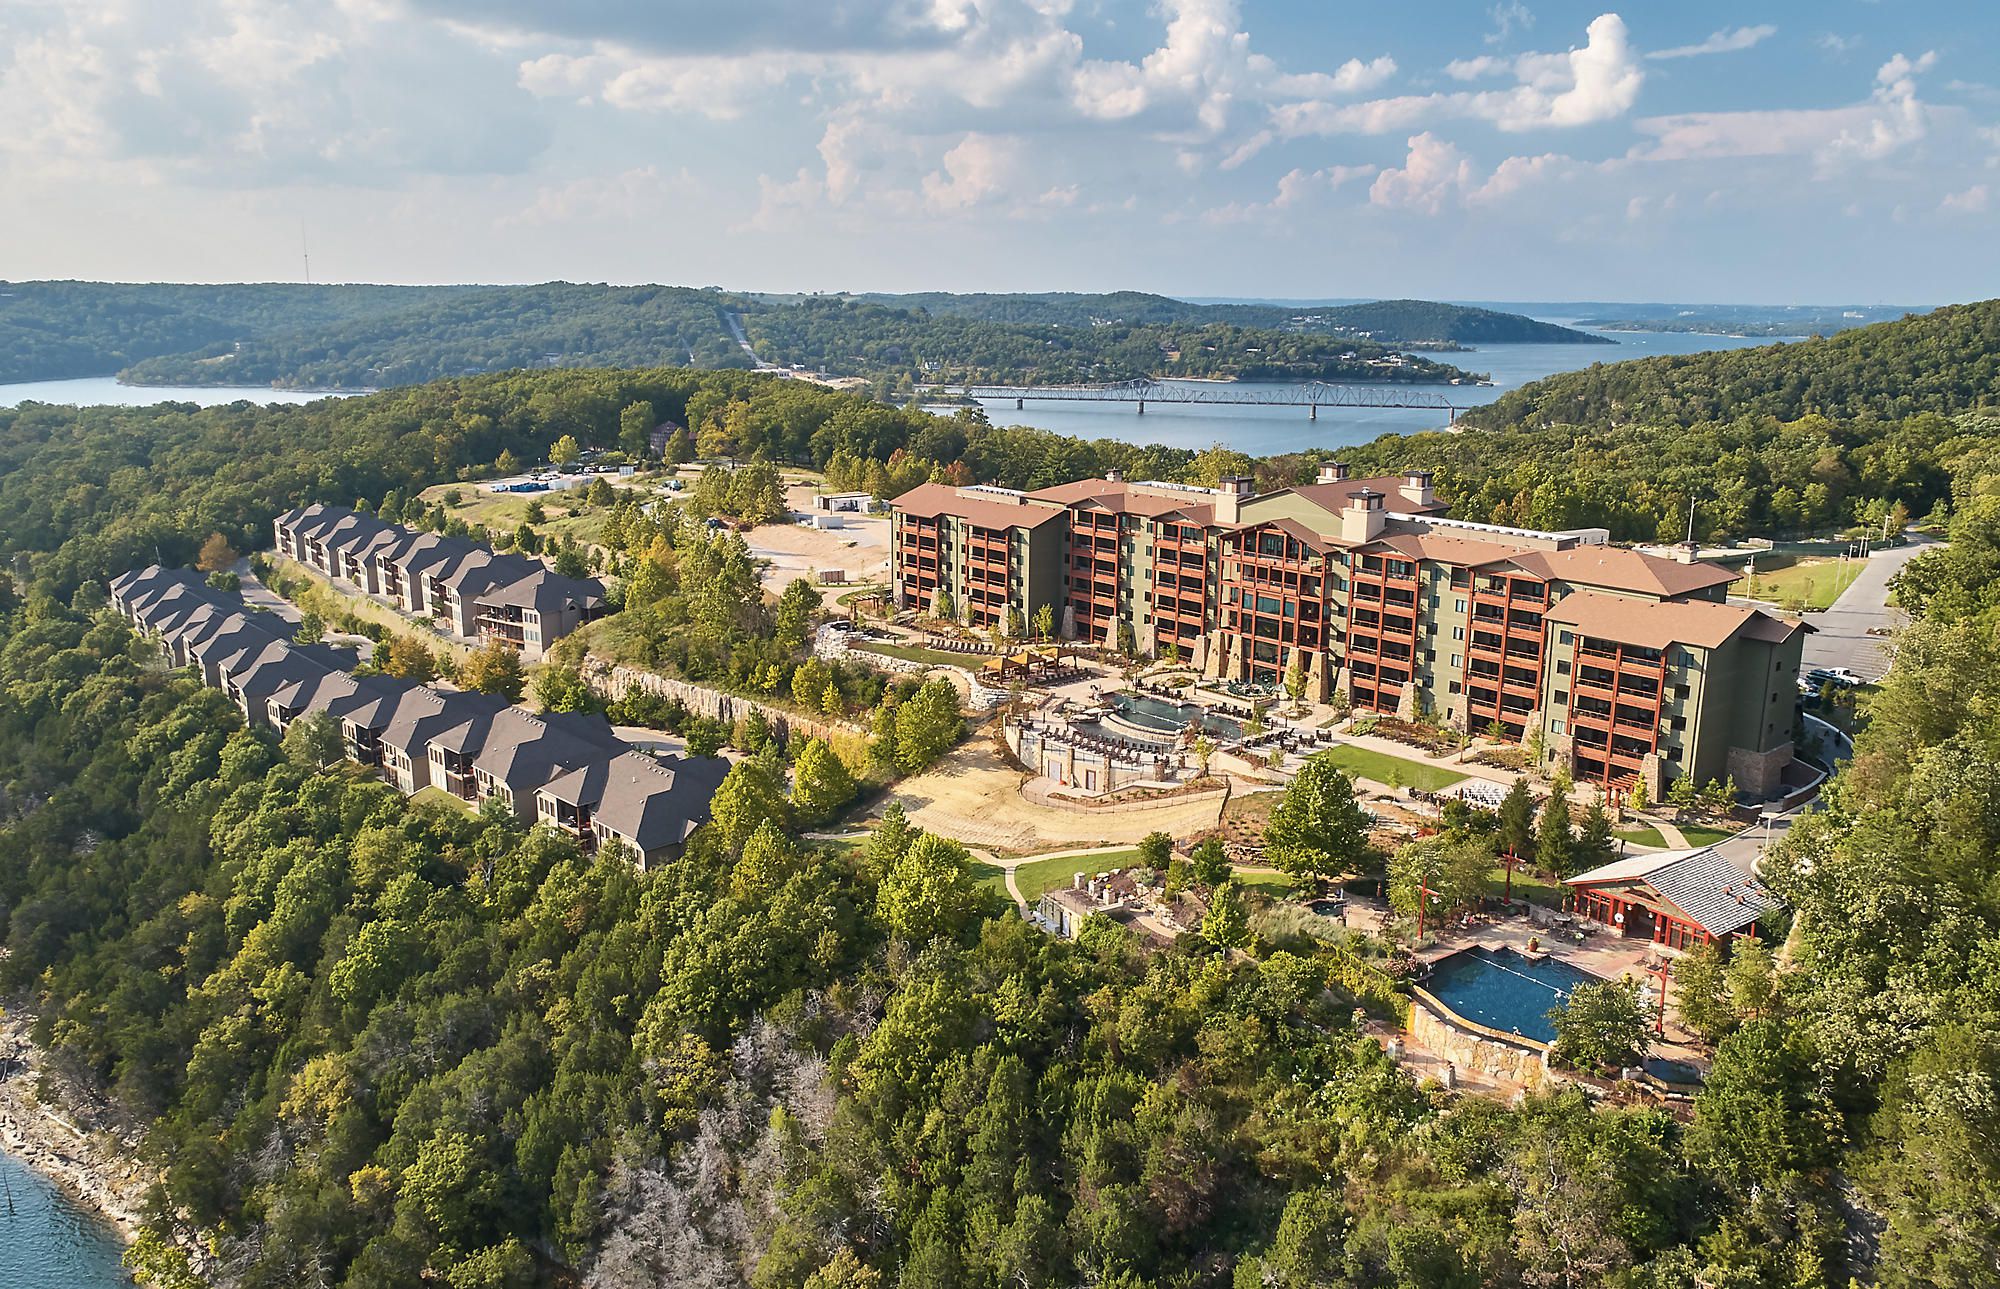 Bluegreen Vacations The Cliffs at Long Creek Aerial View